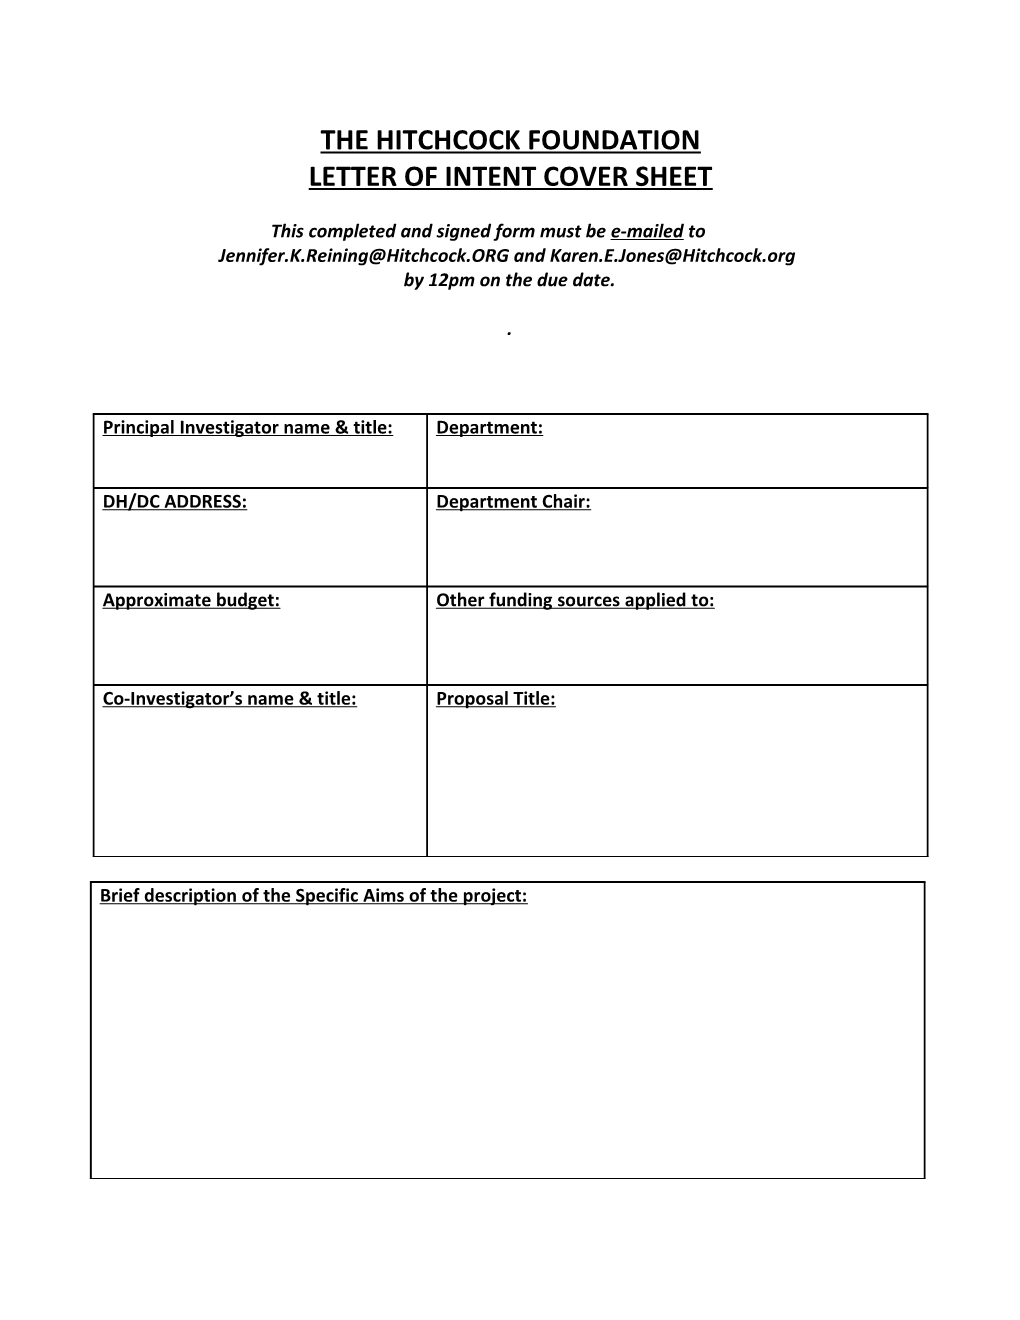 The Hitchcock Foundation: Letter of Intent Cover Sheet